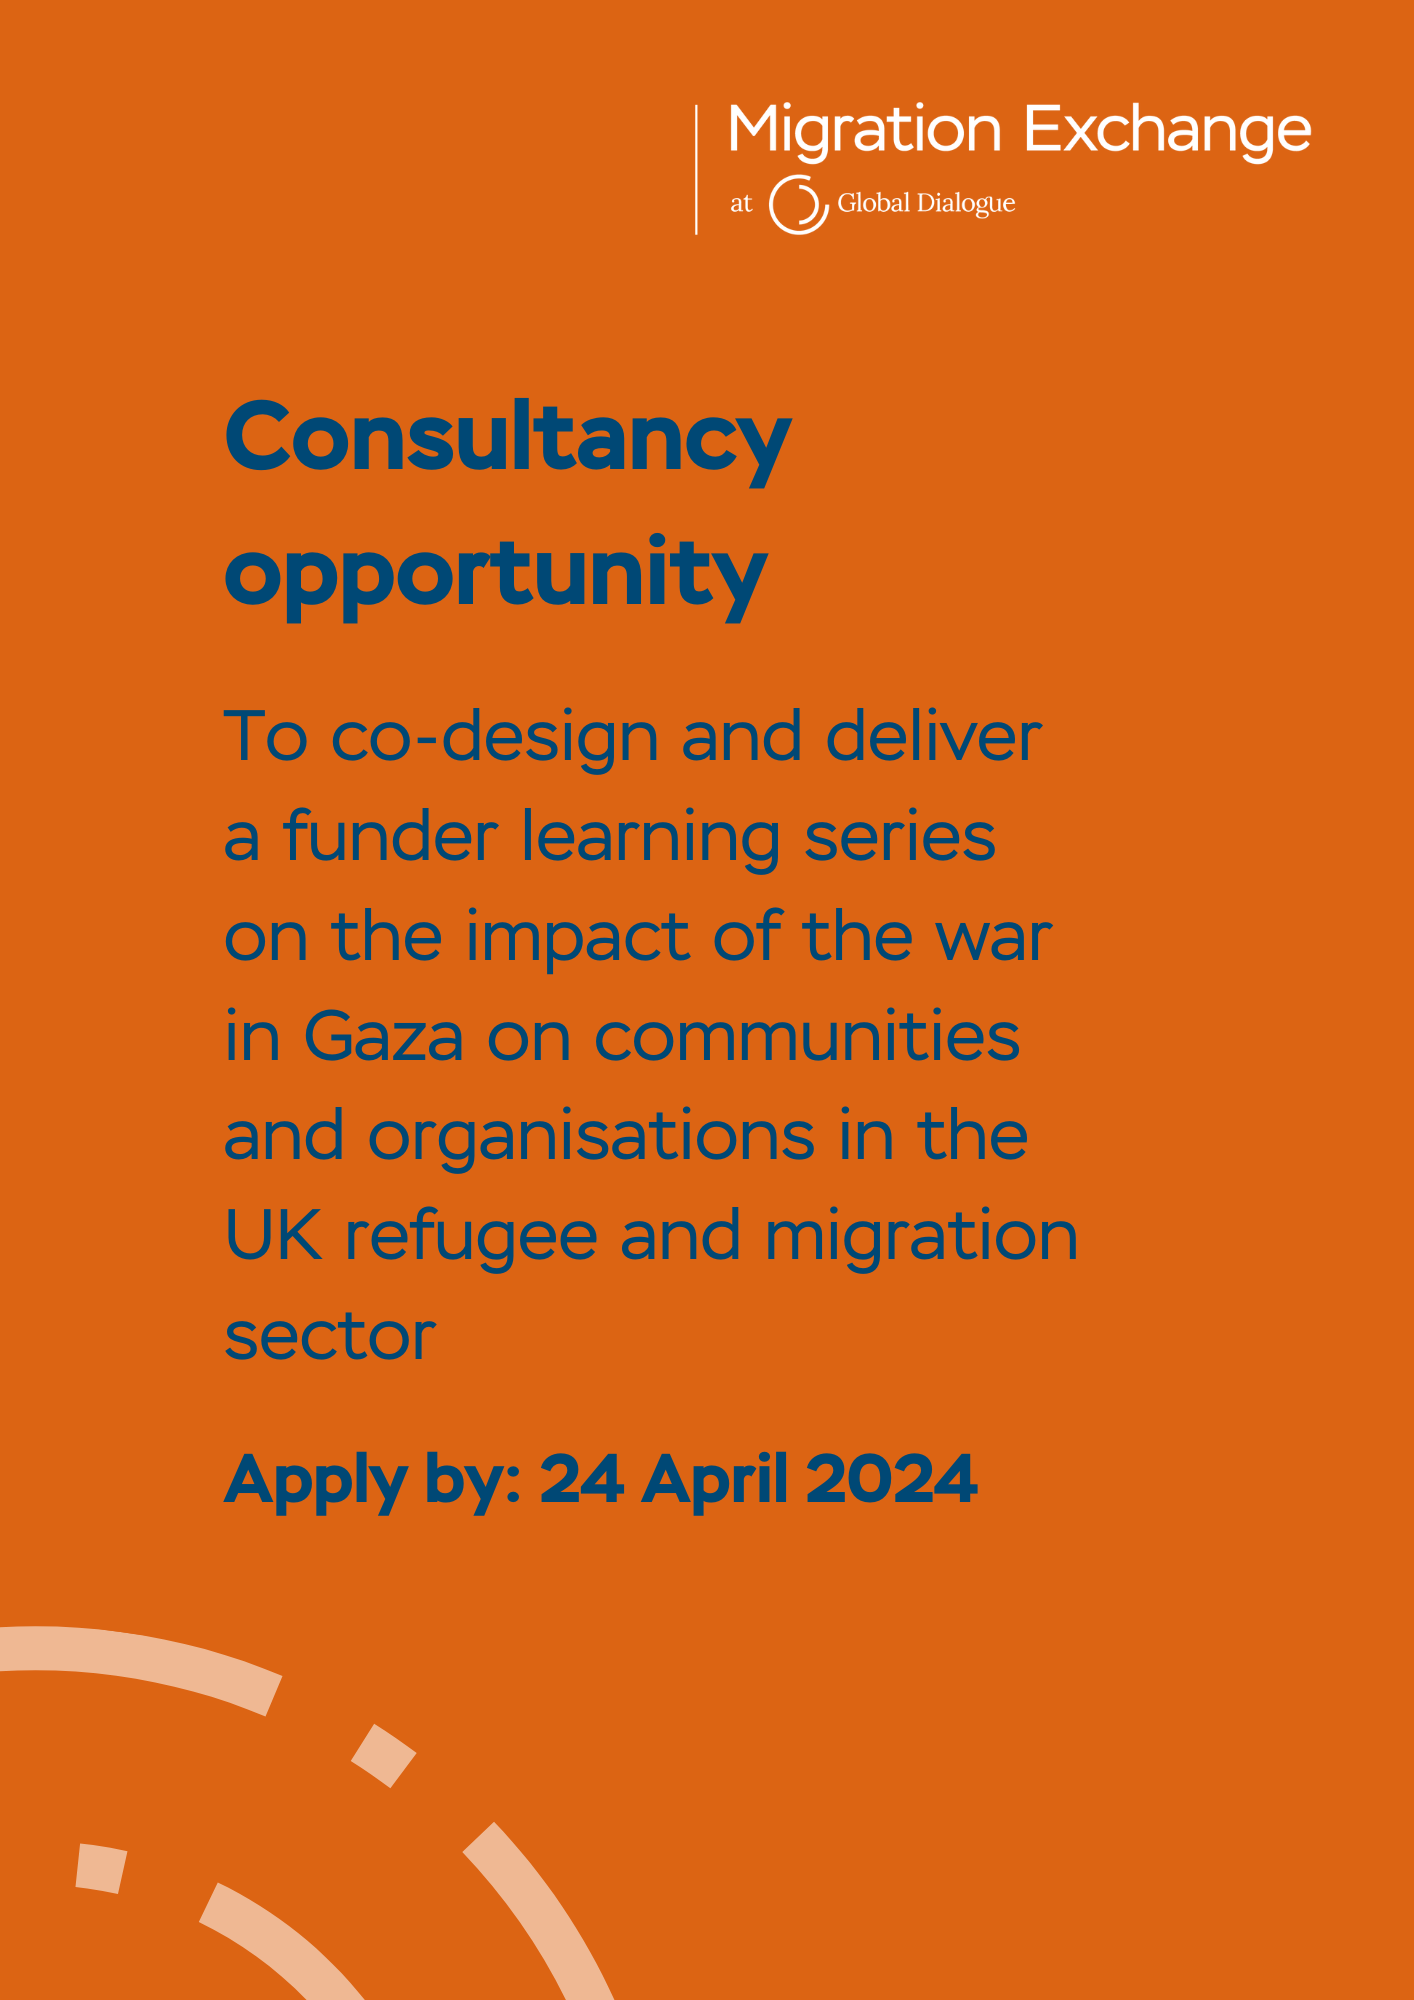 Consultancy opportunity: co-design and deliver a funder learning series on Palestine